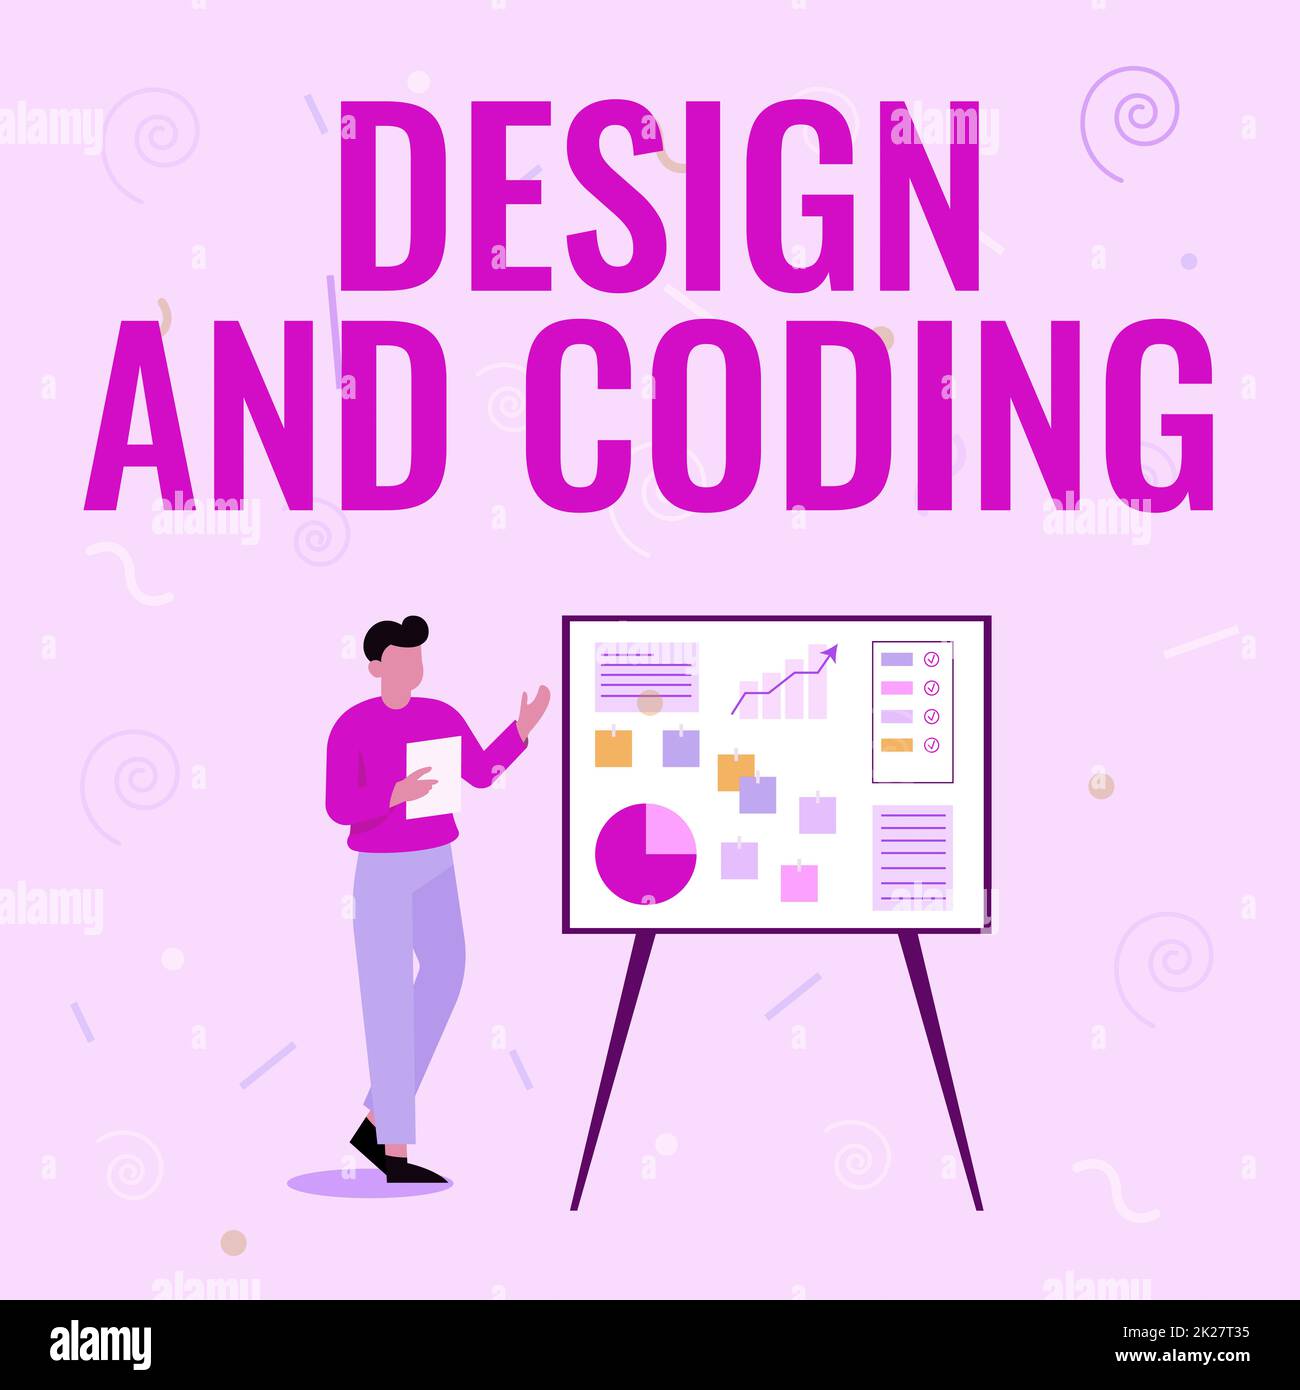 Writing displaying text Design And Coding. Business concept HTML and programming, Cross platform development website Businessman Drawing Standing Presenting Ideas For Their Success. Stock Photo